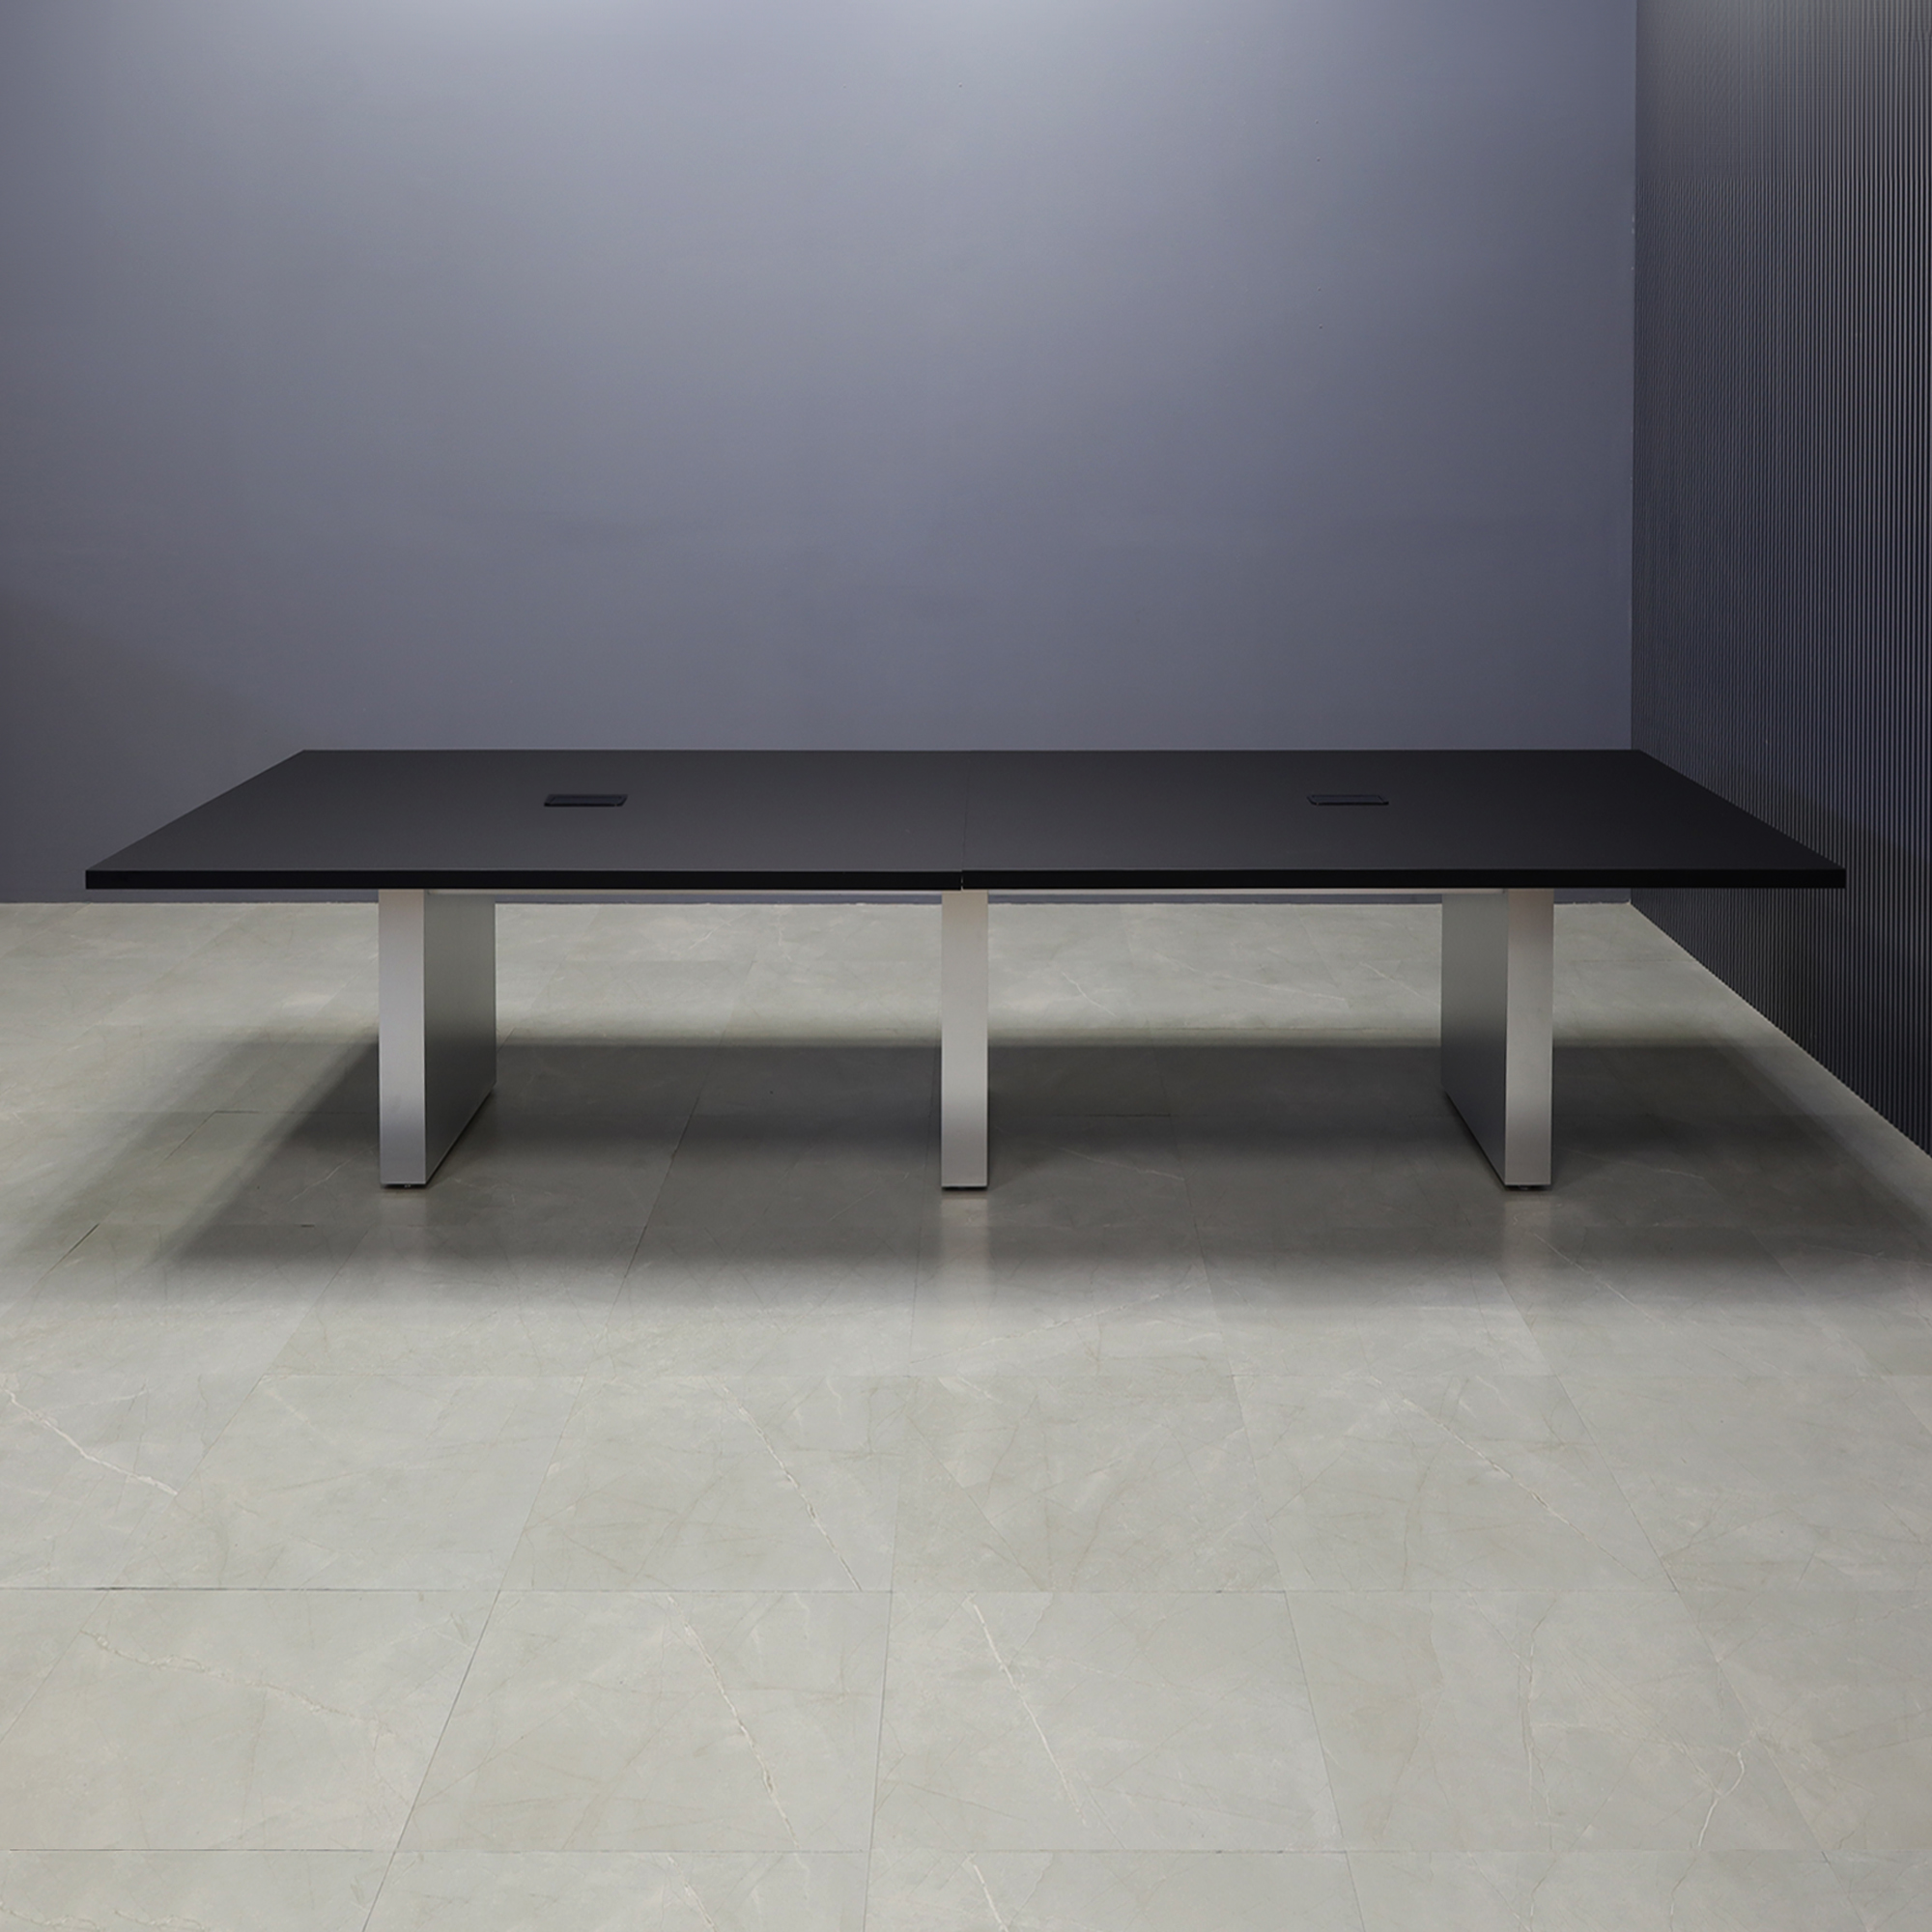 144-inch Newton Rectangular Conference Table in black traceless laminate top and brushed aluminum laminate standard base, with two black powerboxes, shown here.